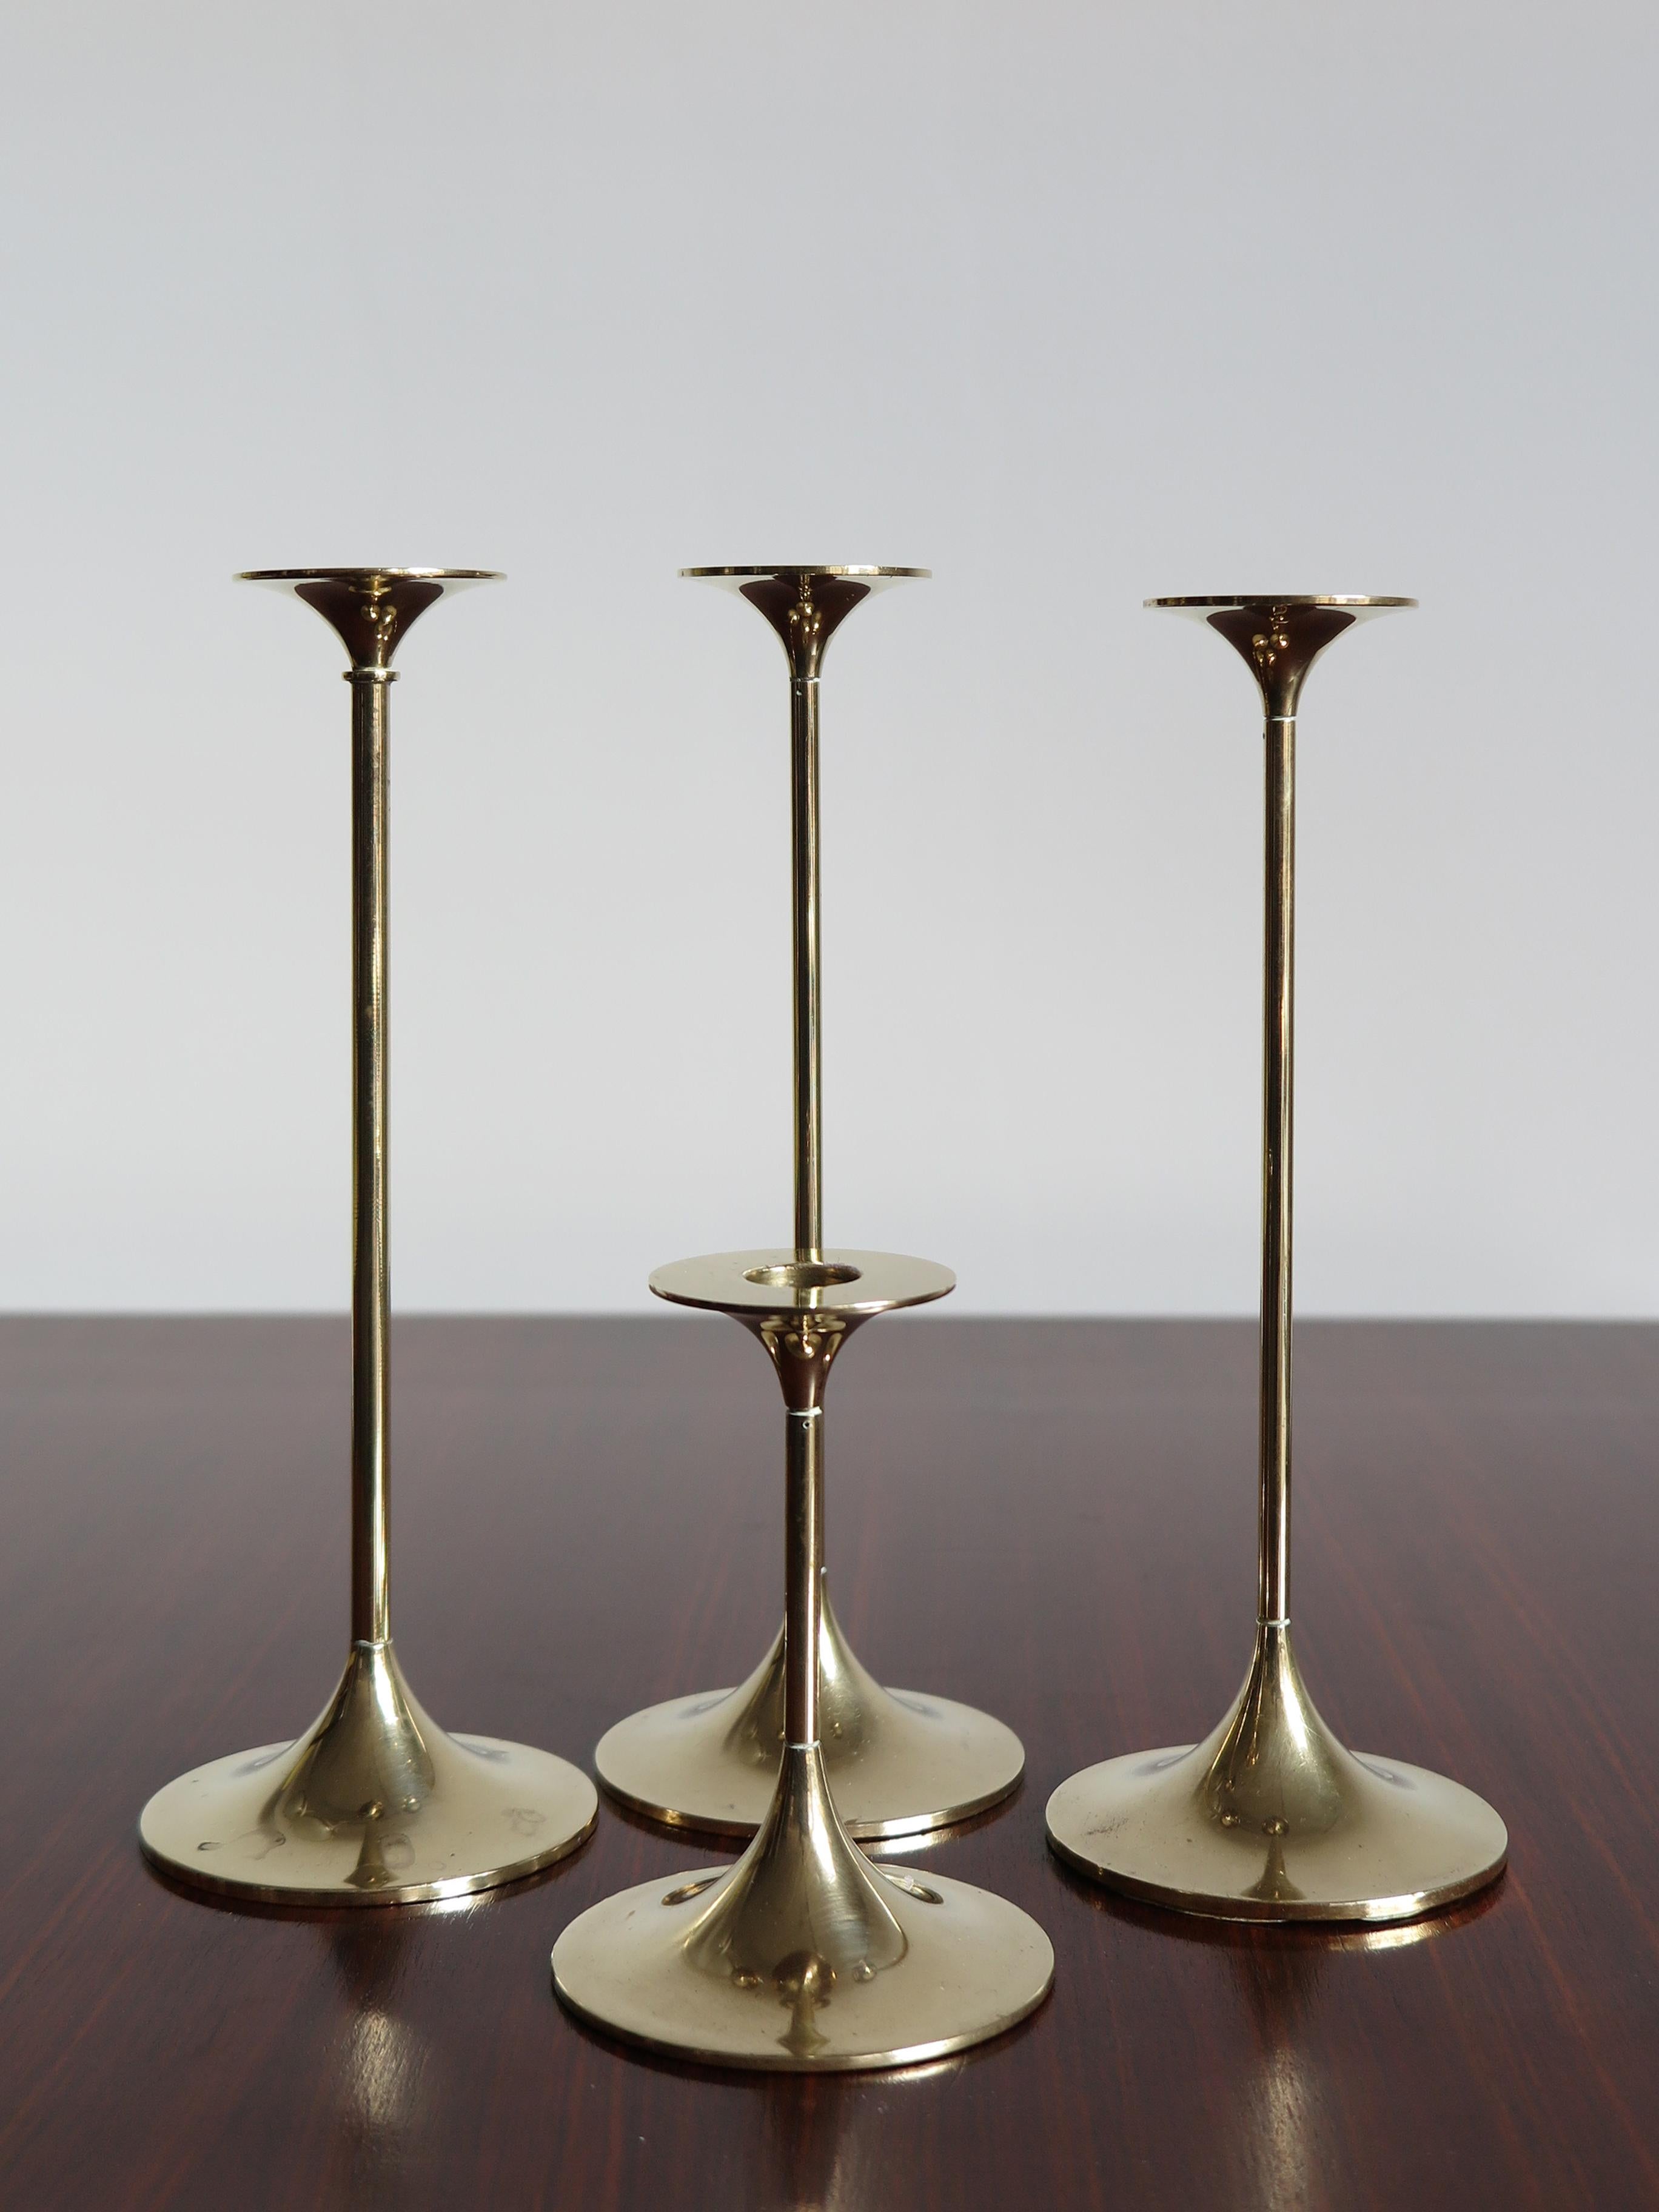 Set of four Mid-Century Modern design solid brass Scandinavian candleholders designed by Max Brüel for Torben Ørskov with engraved manufacturer logo, Denmark, circa 1950.

Please note that the items are original of the period and this shows normal